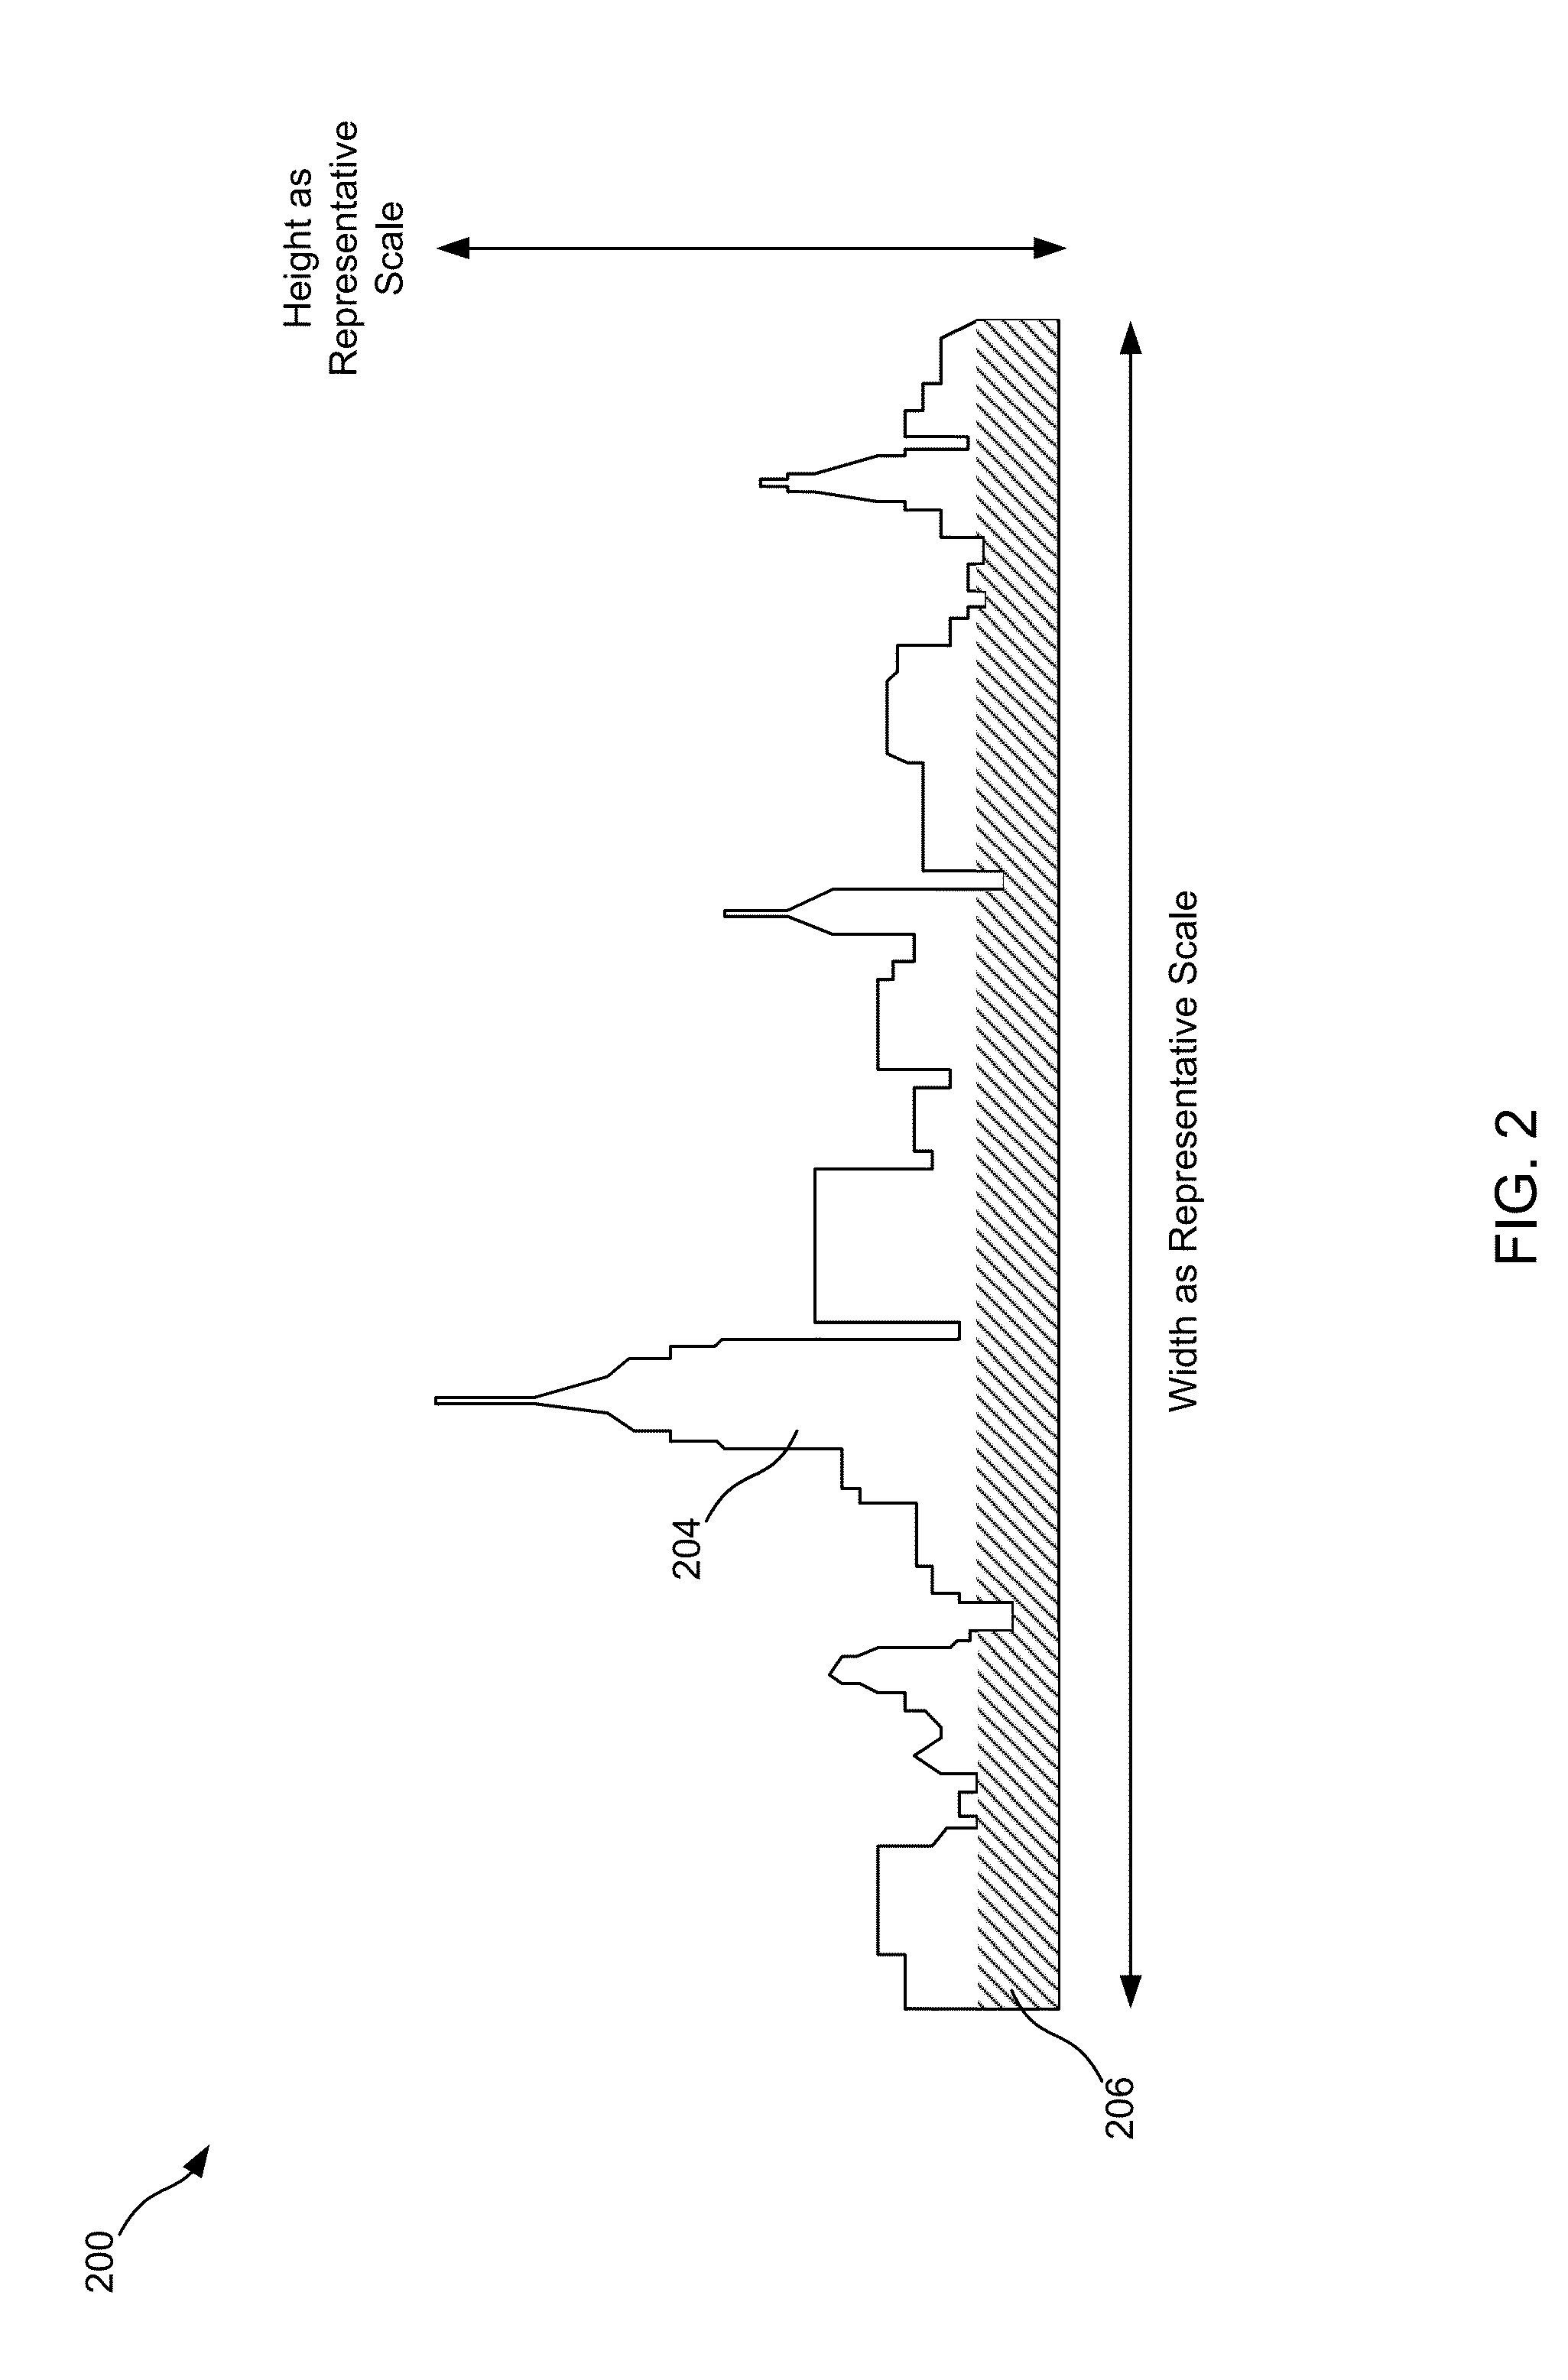 Dynamic filling of shapes for graphical display of data